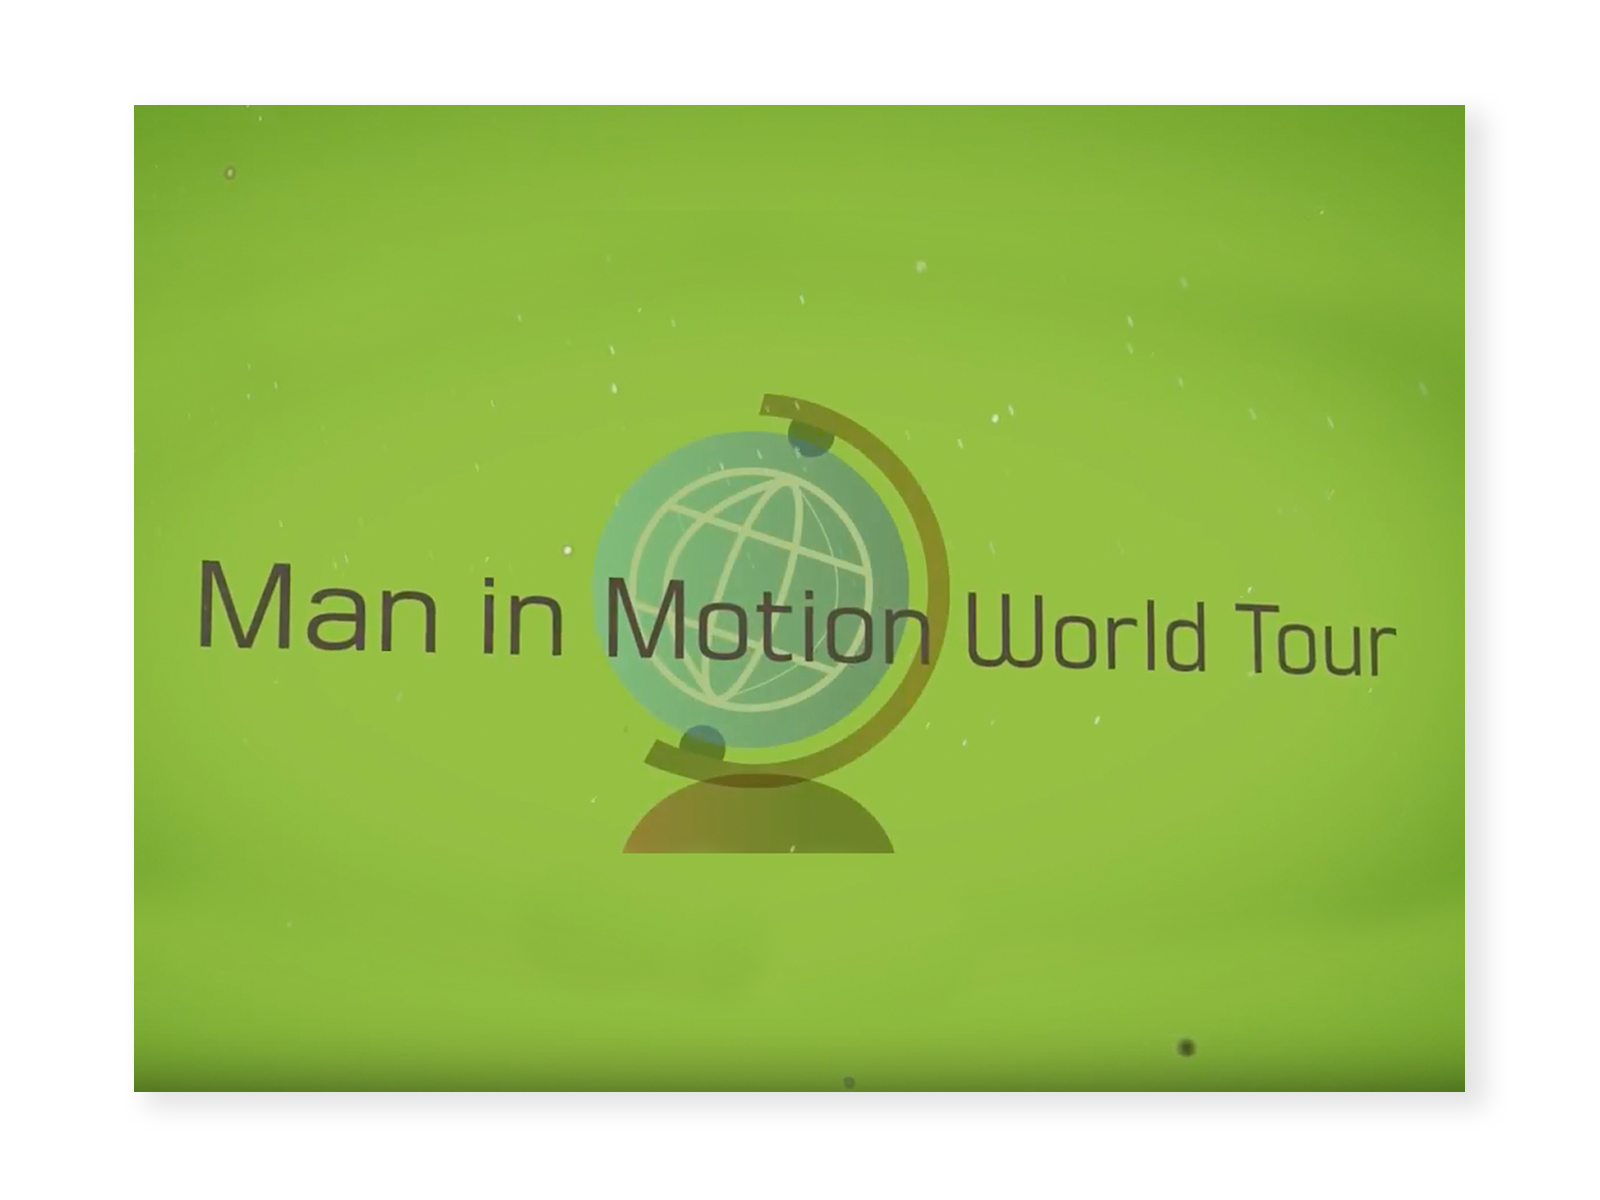 Screenshot from "Man in Motion World Tour" video - green background with a graphic of a globe. The words "Man in Motion World Tour" are overlayed.